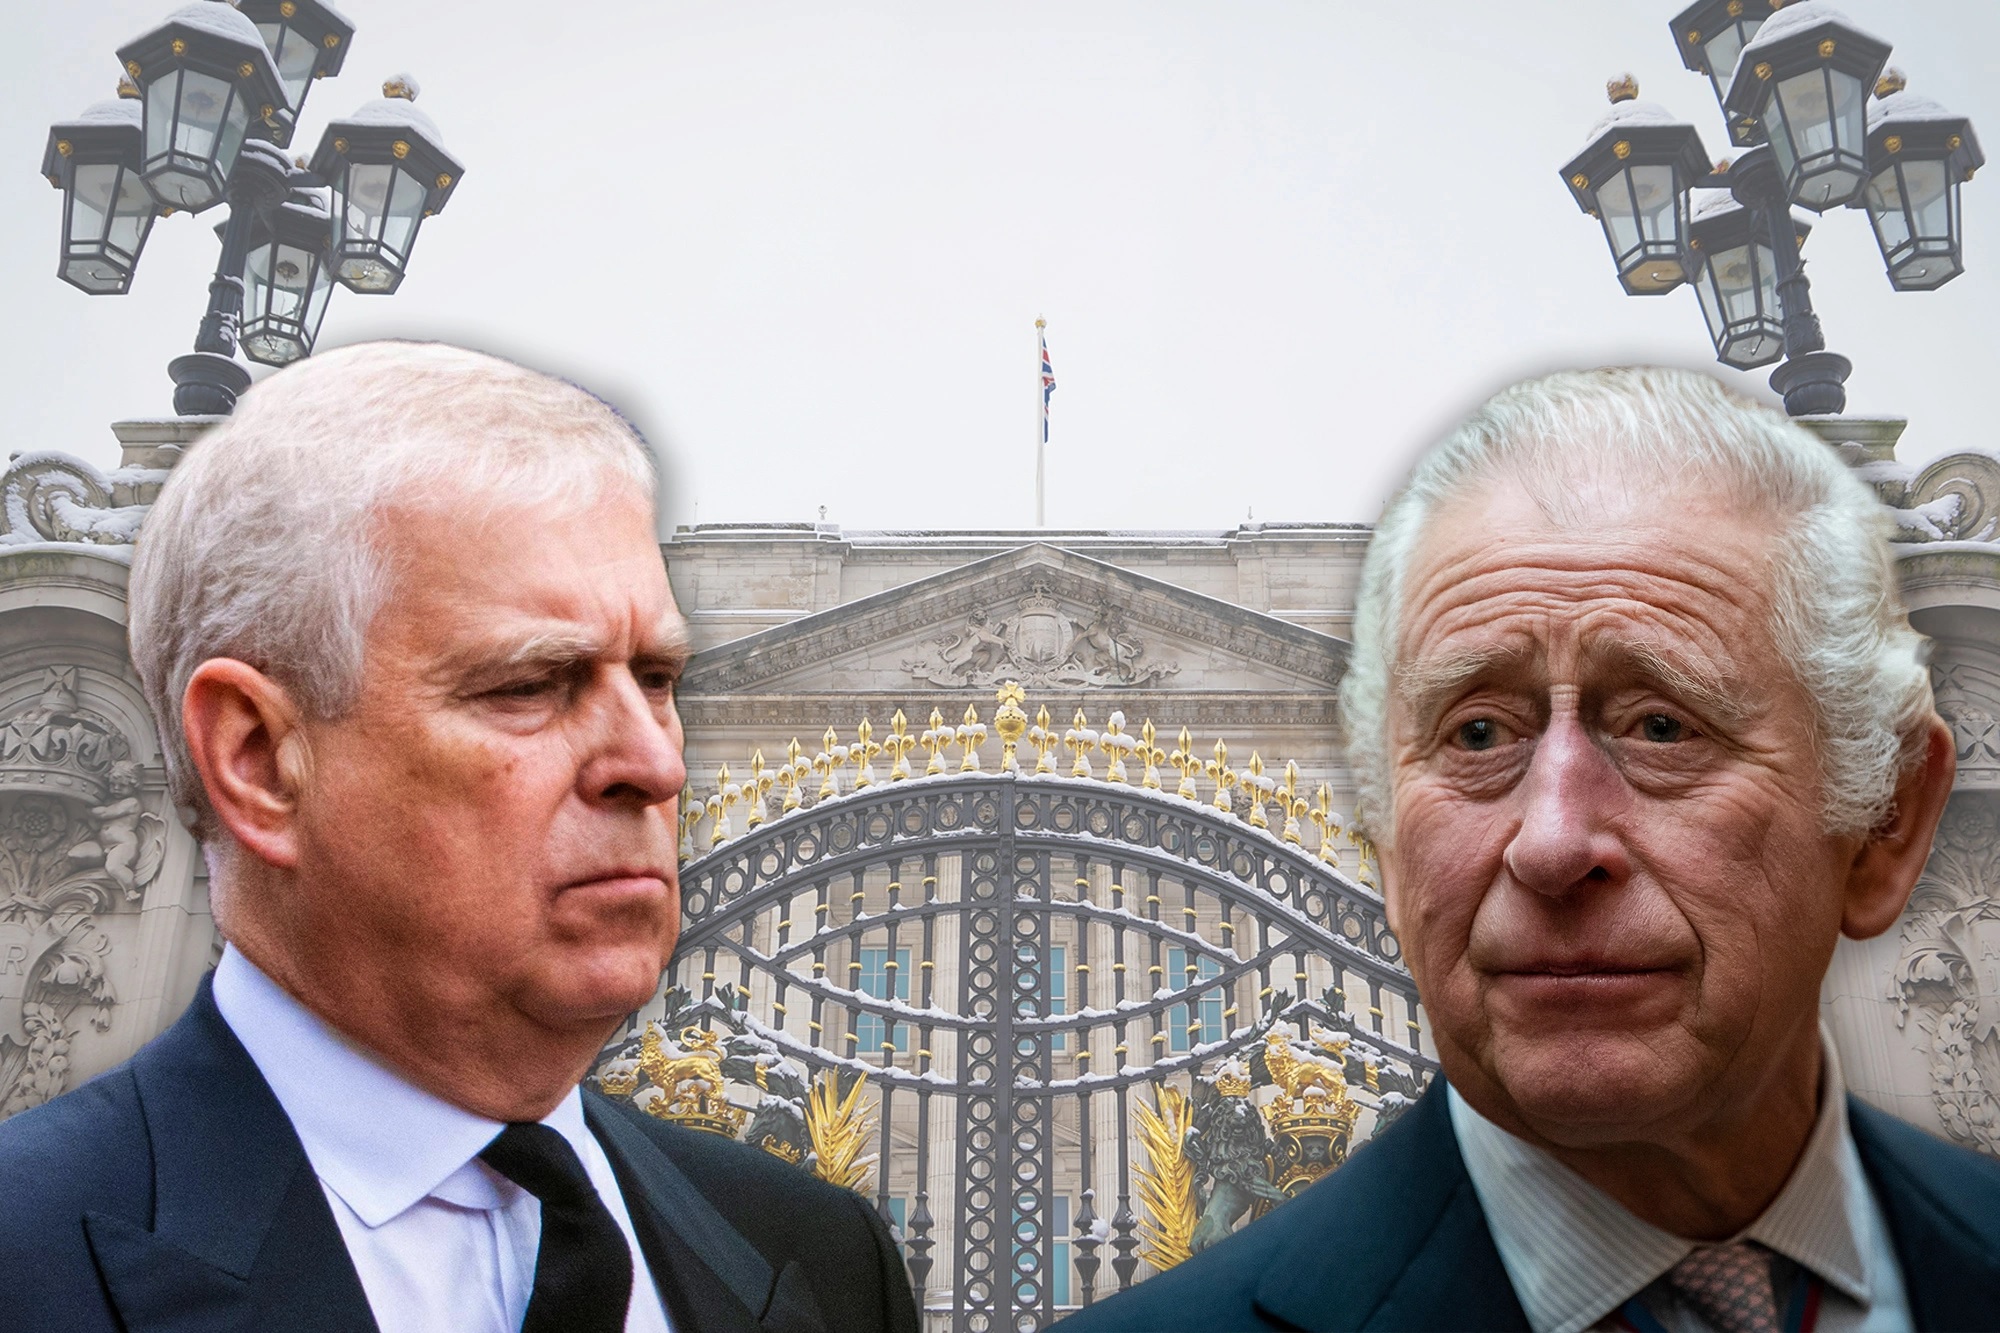 The Reason why Prince Andrew did not attend Garter Day procession with King Charles III